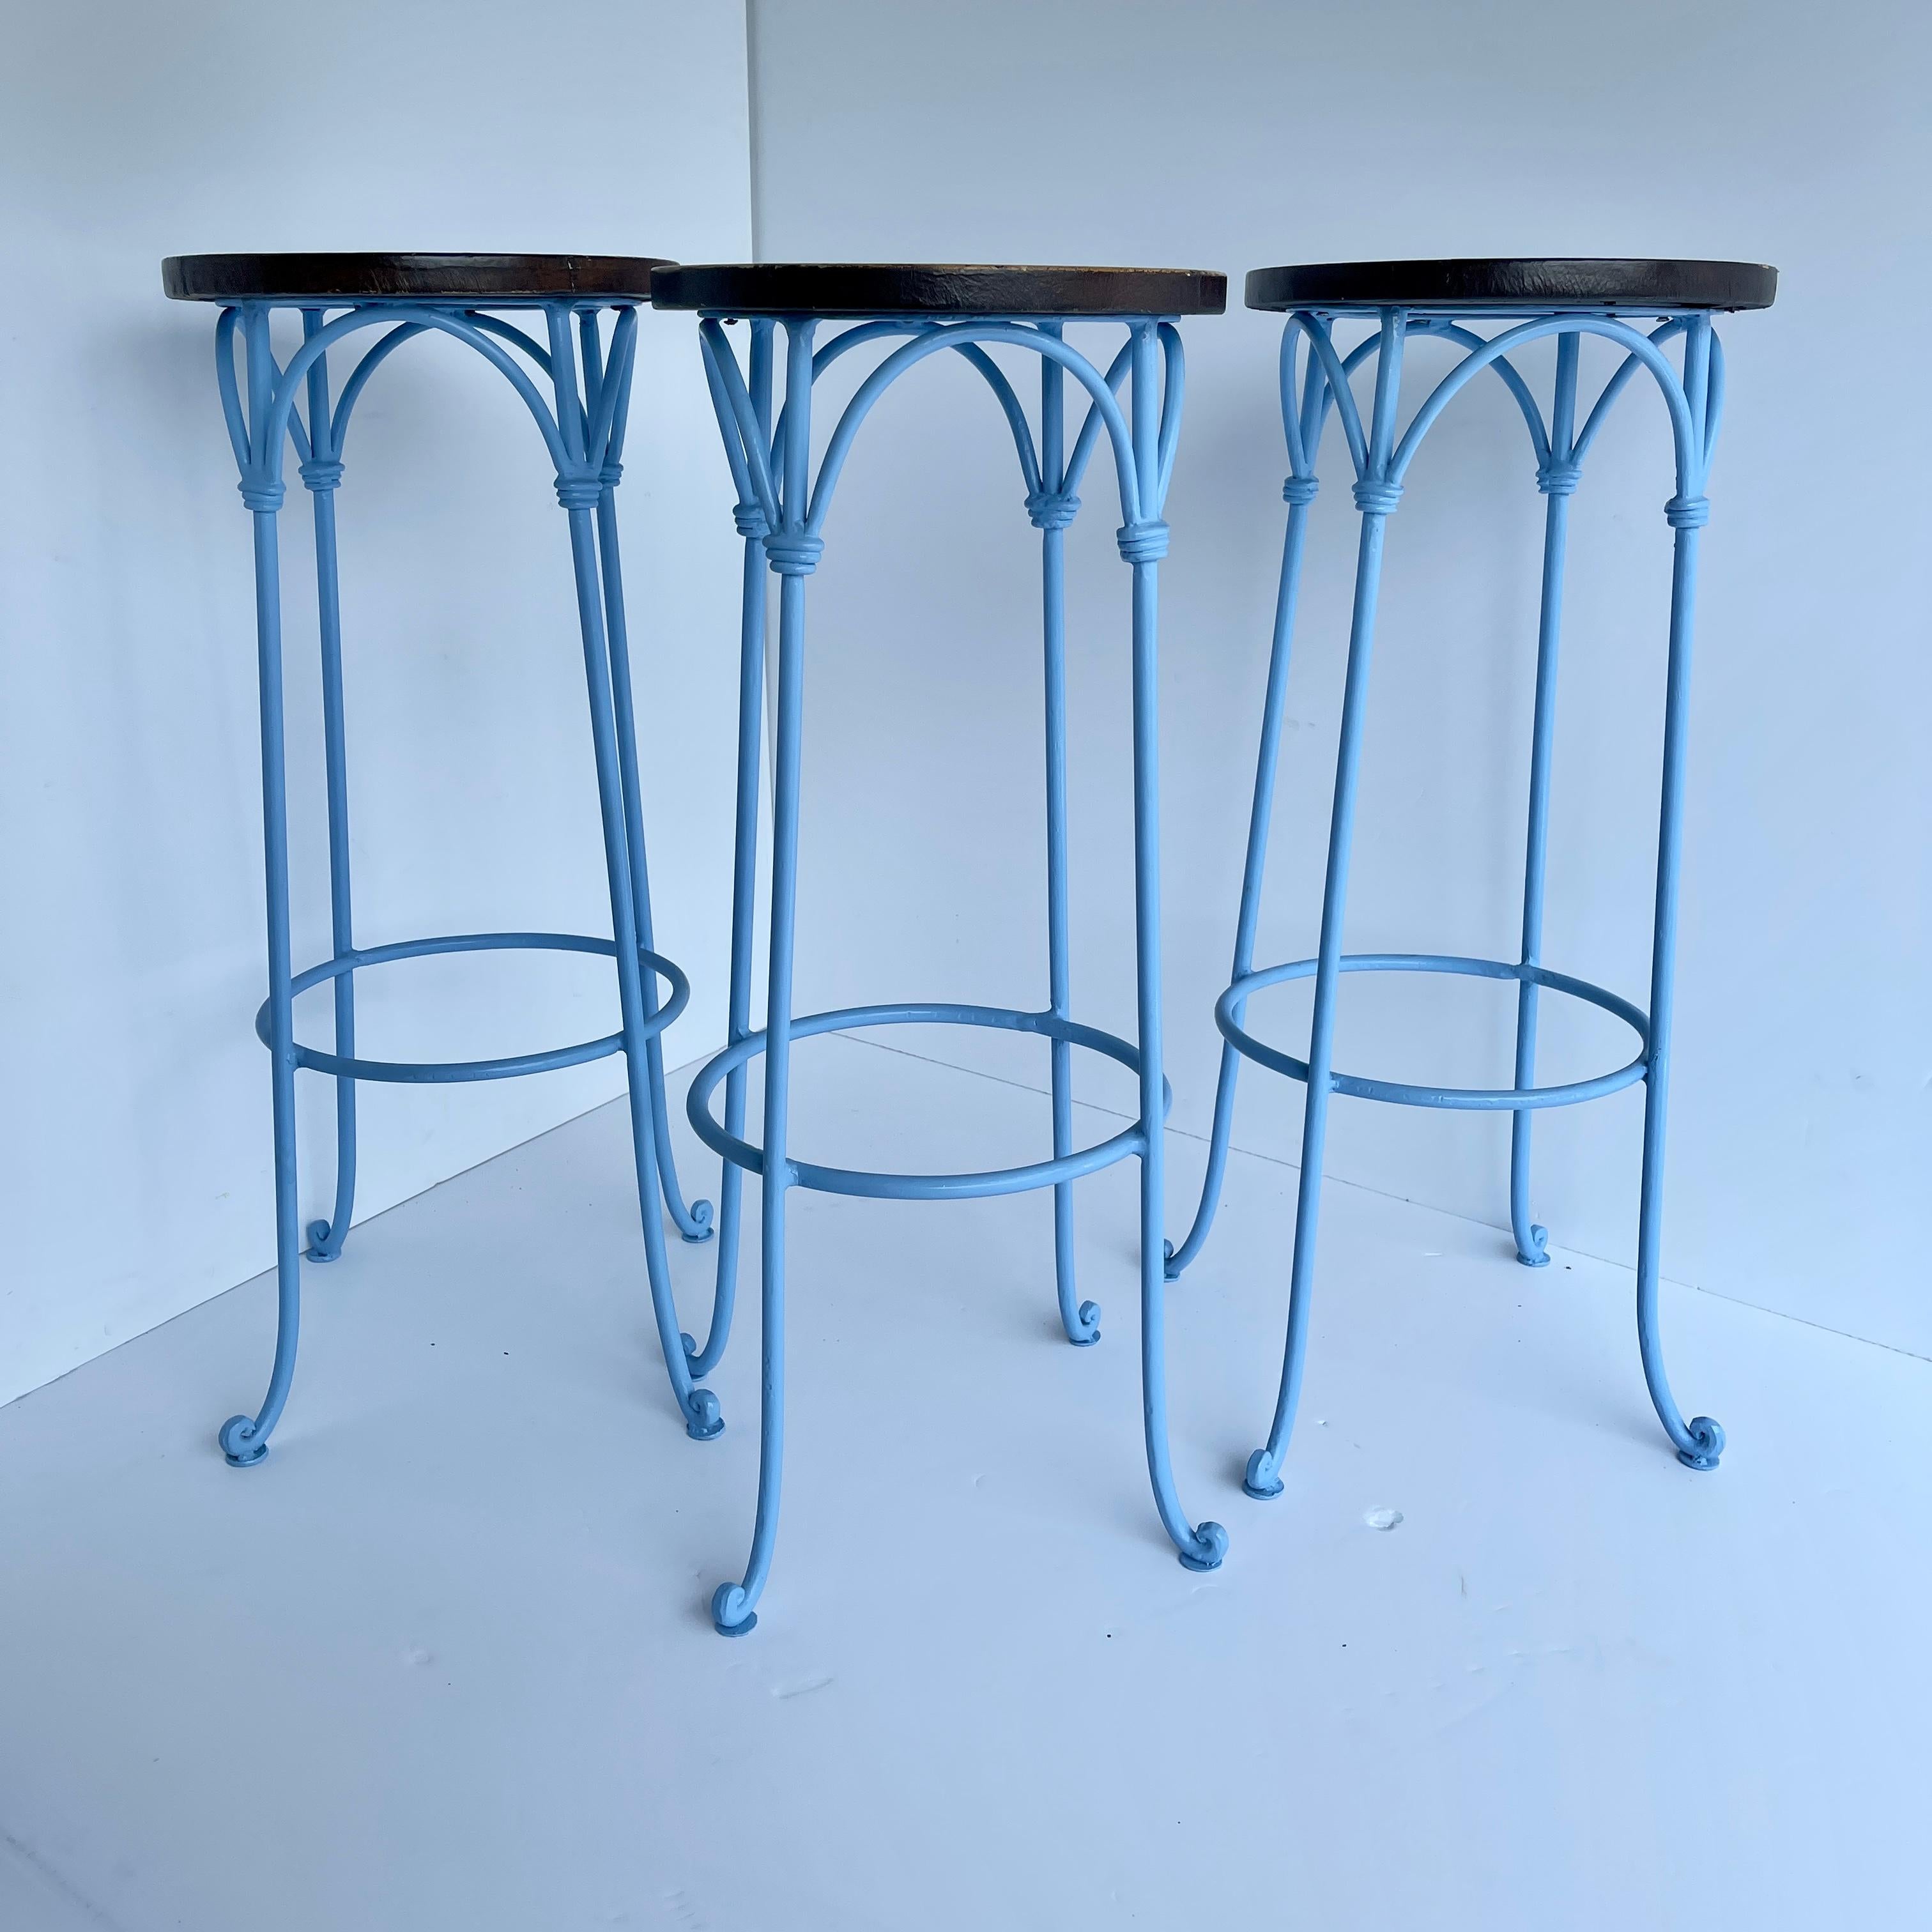 Iron and leather barstools set freshly powder coated in soft Tiffany-blue. 
These modern stools have just been kicked up a notch with cheeky blue tall slender legs. The stitched leather top is a perfect warm contrast. Comfortable with clean lines,